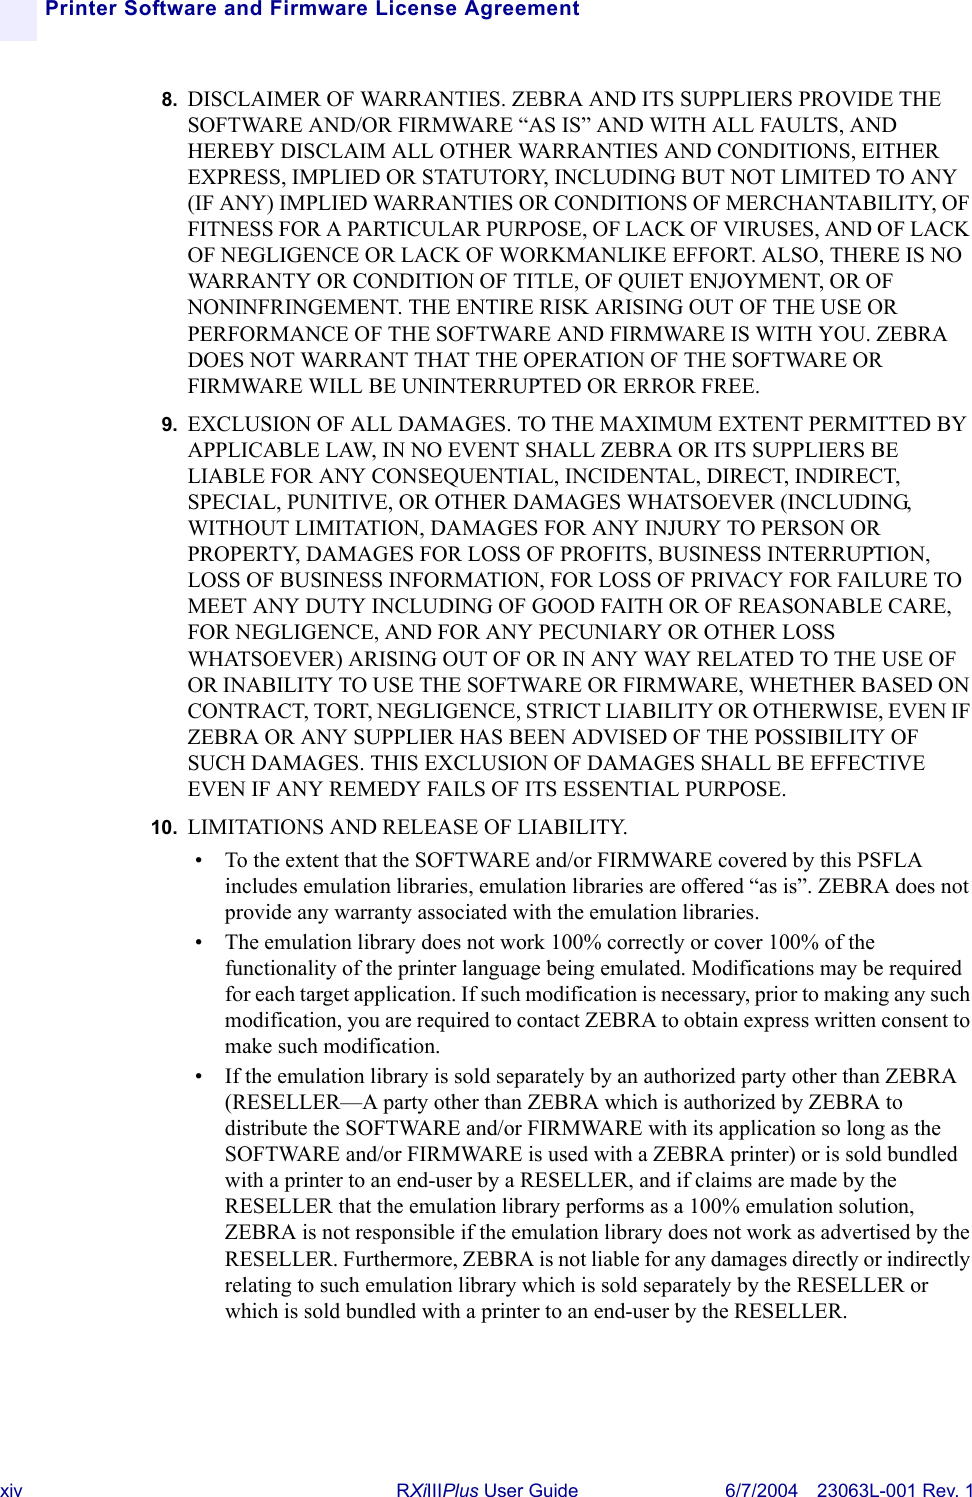 xiv RXiIIIPlus User Guide 6/7/2004 23063L-001 Rev. 1Printer Software and Firmware License Agreement8. DISCLAIMER OF WARRANTIES. ZEBRA AND ITS SUPPLIERS PROVIDE THE SOFTWARE AND/OR FIRMWARE “AS IS” AND WITH ALL FAULTS, AND HEREBY DISCLAIM ALL OTHER WARRANTIES AND CONDITIONS, EITHER EXPRESS, IMPLIED OR STATUTORY, INCLUDING BUT NOT LIMITED TO ANY (IF ANY) IMPLIED WARRANTIES OR CONDITIONS OF MERCHANTABILITY, OF FITNESS FOR A PARTICULAR PURPOSE, OF LACK OF VIRUSES, AND OF LACK OF NEGLIGENCE OR LACK OF WORKMANLIKE EFFORT. ALSO, THERE IS NO WARRANTY OR CONDITION OF TITLE, OF QUIET ENJOYMENT, OR OF NONINFRINGEMENT. THE ENTIRE RISK ARISING OUT OF THE USE OR PERFORMANCE OF THE SOFTWARE AND FIRMWARE IS WITH YOU. ZEBRA DOES NOT WARRANT THAT THE OPERATION OF THE SOFTWARE OR FIRMWARE WILL BE UNINTERRUPTED OR ERROR FREE.9. EXCLUSION OF ALL DAMAGES. TO THE MAXIMUM EXTENT PERMITTED BY APPLICABLE LAW, IN NO EVENT SHALL ZEBRA OR ITS SUPPLIERS BE LIABLE FOR ANY CONSEQUENTIAL, INCIDENTAL, DIRECT, INDIRECT, SPECIAL, PUNITIVE, OR OTHER DAMAGES WHATSOEVER (INCLUDING, WITHOUT LIMITATION, DAMAGES FOR ANY INJURY TO PERSON OR PROPERTY, DAMAGES FOR LOSS OF PROFITS, BUSINESS INTERRUPTION, LOSS OF BUSINESS INFORMATION, FOR LOSS OF PRIVACY FOR FAILURE TO MEET ANY DUTY INCLUDING OF GOOD FAITH OR OF REASONABLE CARE, FOR NEGLIGENCE, AND FOR ANY PECUNIARY OR OTHER LOSS WHATSOEVER) ARISING OUT OF OR IN ANY WAY RELATED TO THE USE OF OR INABILITY TO USE THE SOFTWARE OR FIRMWARE, WHETHER BASED ON CONTRACT, TORT, NEGLIGENCE, STRICT LIABILITY OR OTHERWISE, EVEN IF ZEBRA OR ANY SUPPLIER HAS BEEN ADVISED OF THE POSSIBILITY OF SUCH DAMAGES. THIS EXCLUSION OF DAMAGES SHALL BE EFFECTIVE EVEN IF ANY REMEDY FAILS OF ITS ESSENTIAL PURPOSE.10. LIMITATIONS AND RELEASE OF LIABILITY.• To the extent that the SOFTWARE and/or FIRMWARE covered by this PSFLA includes emulation libraries, emulation libraries are offered “as is”. ZEBRA does not provide any warranty associated with the emulation libraries.• The emulation library does not work 100% correctly or cover 100% of the functionality of the printer language being emulated. Modifications may be required for each target application. If such modification is necessary, prior to making any such modification, you are required to contact ZEBRA to obtain express written consent to make such modification.• If the emulation library is sold separately by an authorized party other than ZEBRA (RESELLER—A party other than ZEBRA which is authorized by ZEBRA to distribute the SOFTWARE and/or FIRMWARE with its application so long as the SOFTWARE and/or FIRMWARE is used with a ZEBRA printer) or is sold bundled with a printer to an end-user by a RESELLER, and if claims are made by the RESELLER that the emulation library performs as a 100% emulation solution, ZEBRA is not responsible if the emulation library does not work as advertised by the RESELLER. Furthermore, ZEBRA is not liable for any damages directly or indirectly relating to such emulation library which is sold separately by the RESELLER or which is sold bundled with a printer to an end-user by the RESELLER.